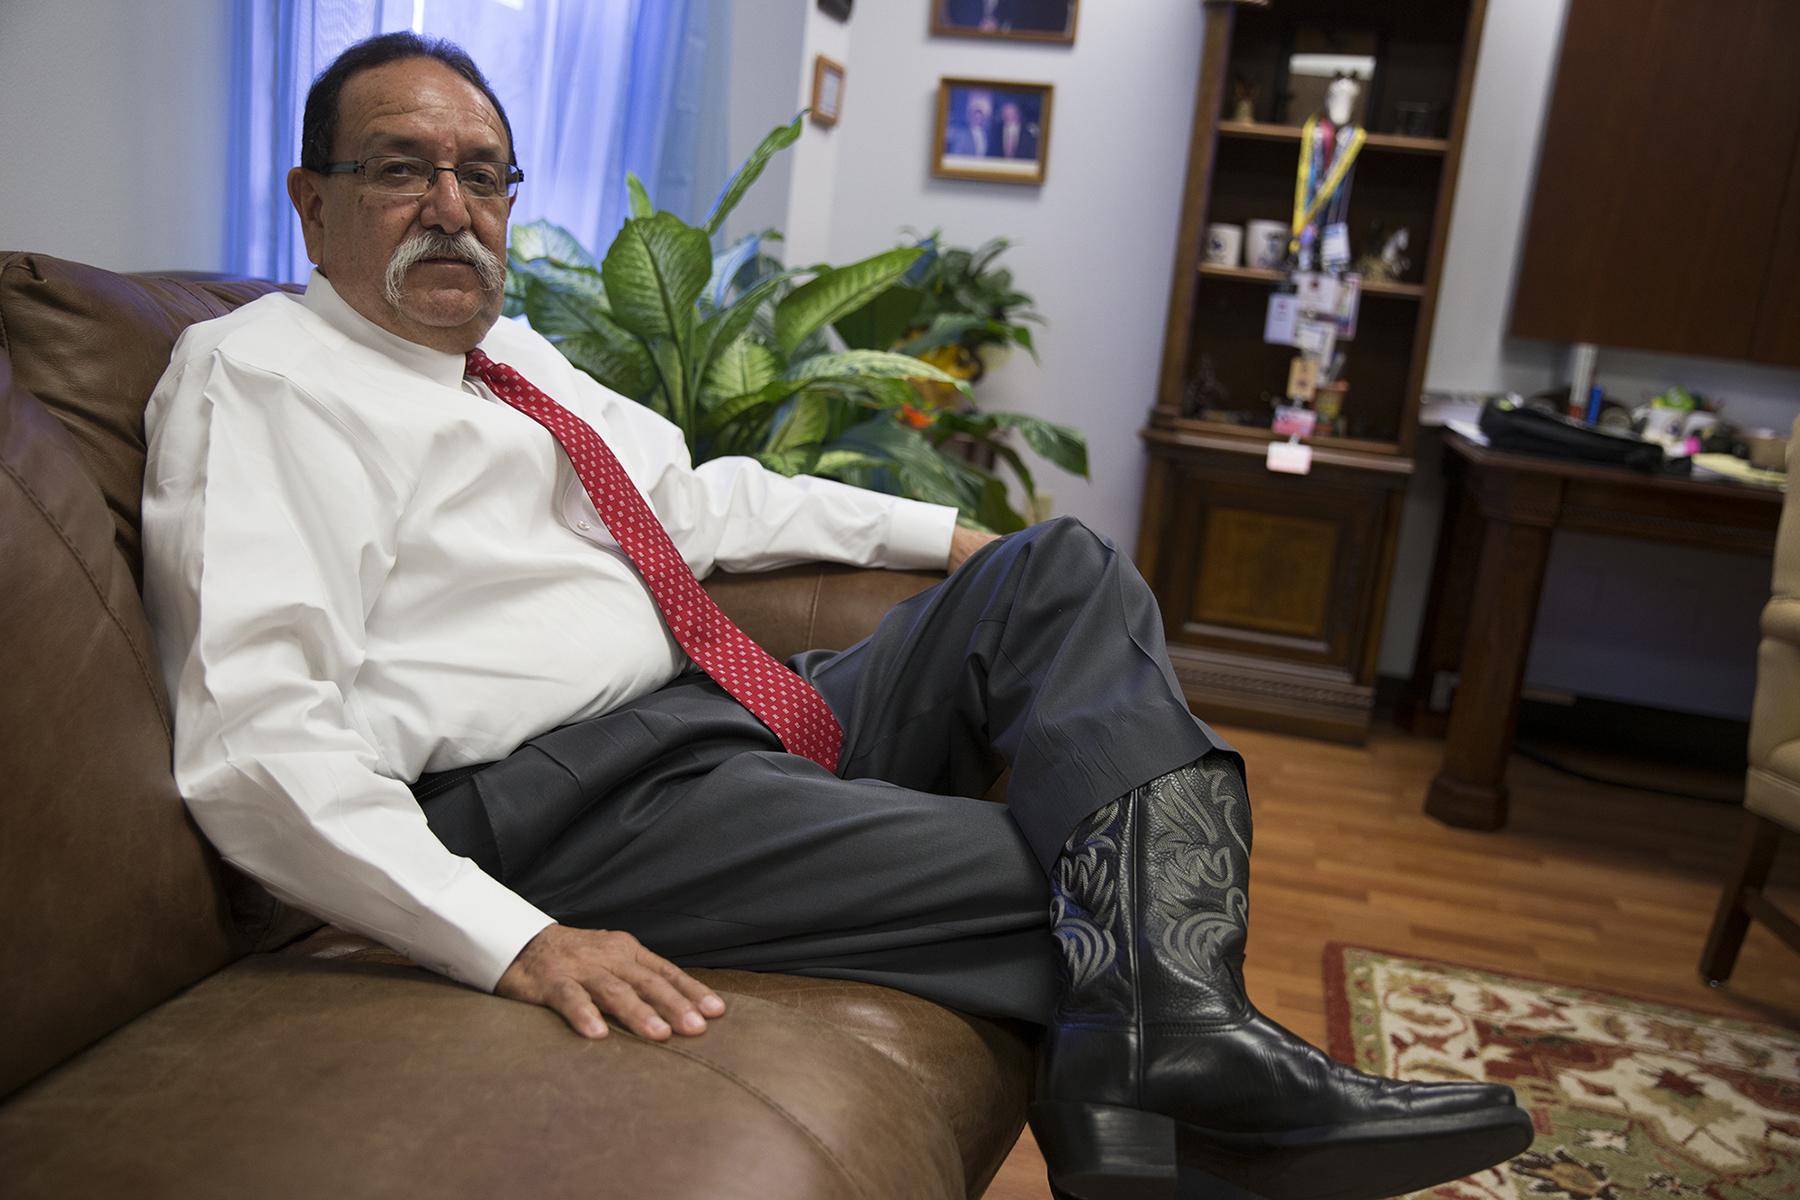 Luis Saenz, the district attorney in Cameron County, Texas, discusses voter fraud in his office in Brownsville. Saenz’s office assisted the state’s attorney general with prosecuting six women who were arrested for mail-in ballot fraud during the 2012 Democratic primary runoff. Mail-in ballot harvesters — or “politiqueras” — are not as prevalent in the Rio Grande Valley after the 2012 arrests, Saenz said. (Pinar Istek/News21)